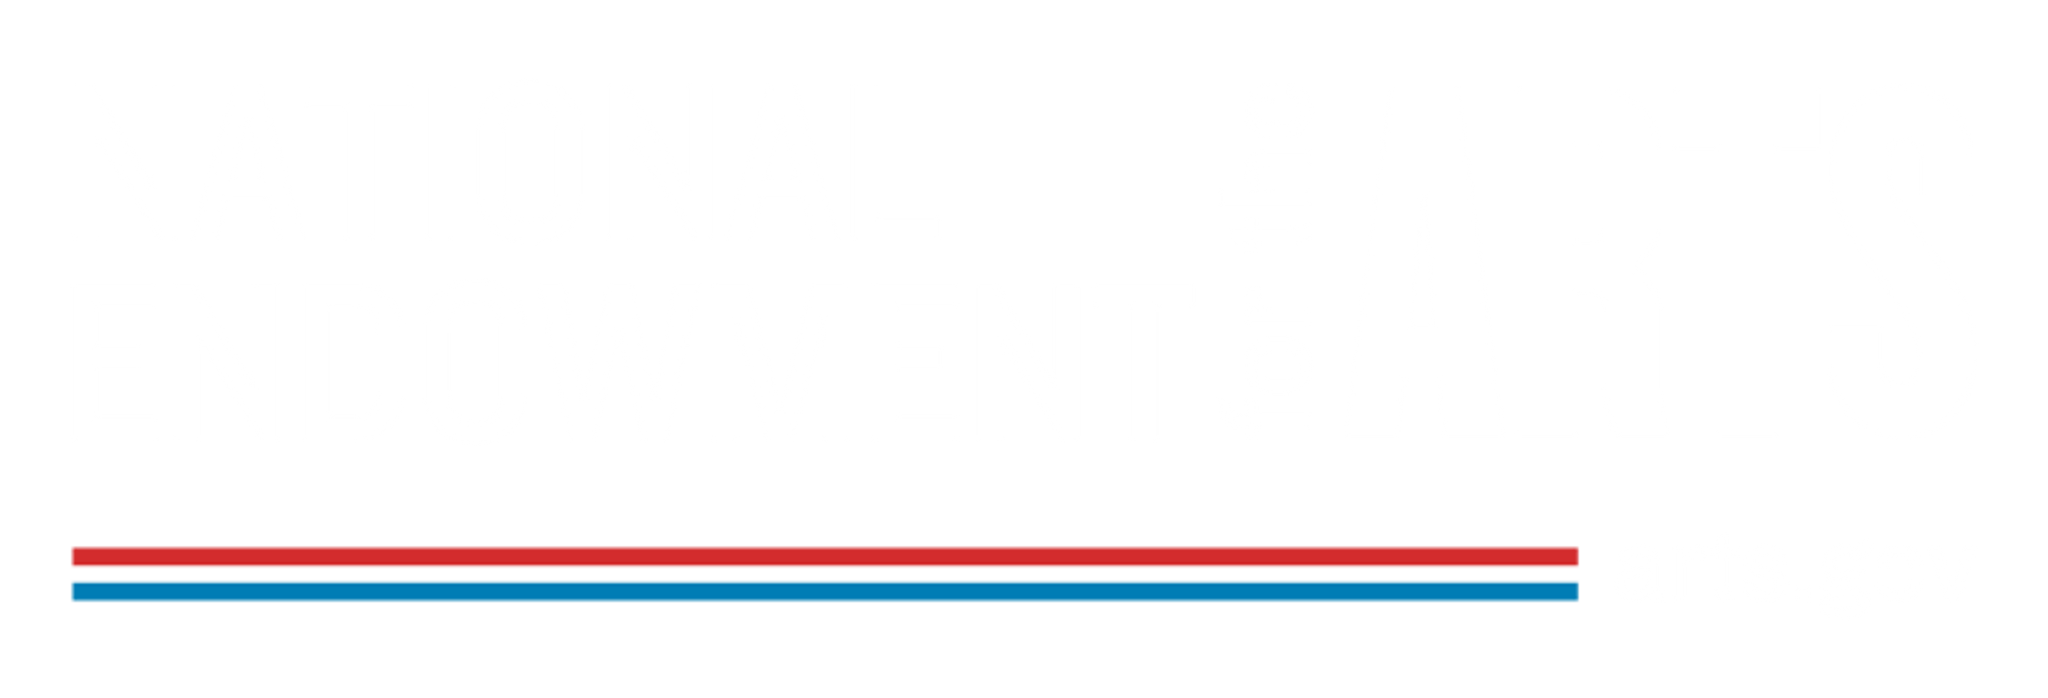 The National Endowment for the Arts logo, with the organization's name above two horizontal lines of blue and red ending in the URL arts.gov